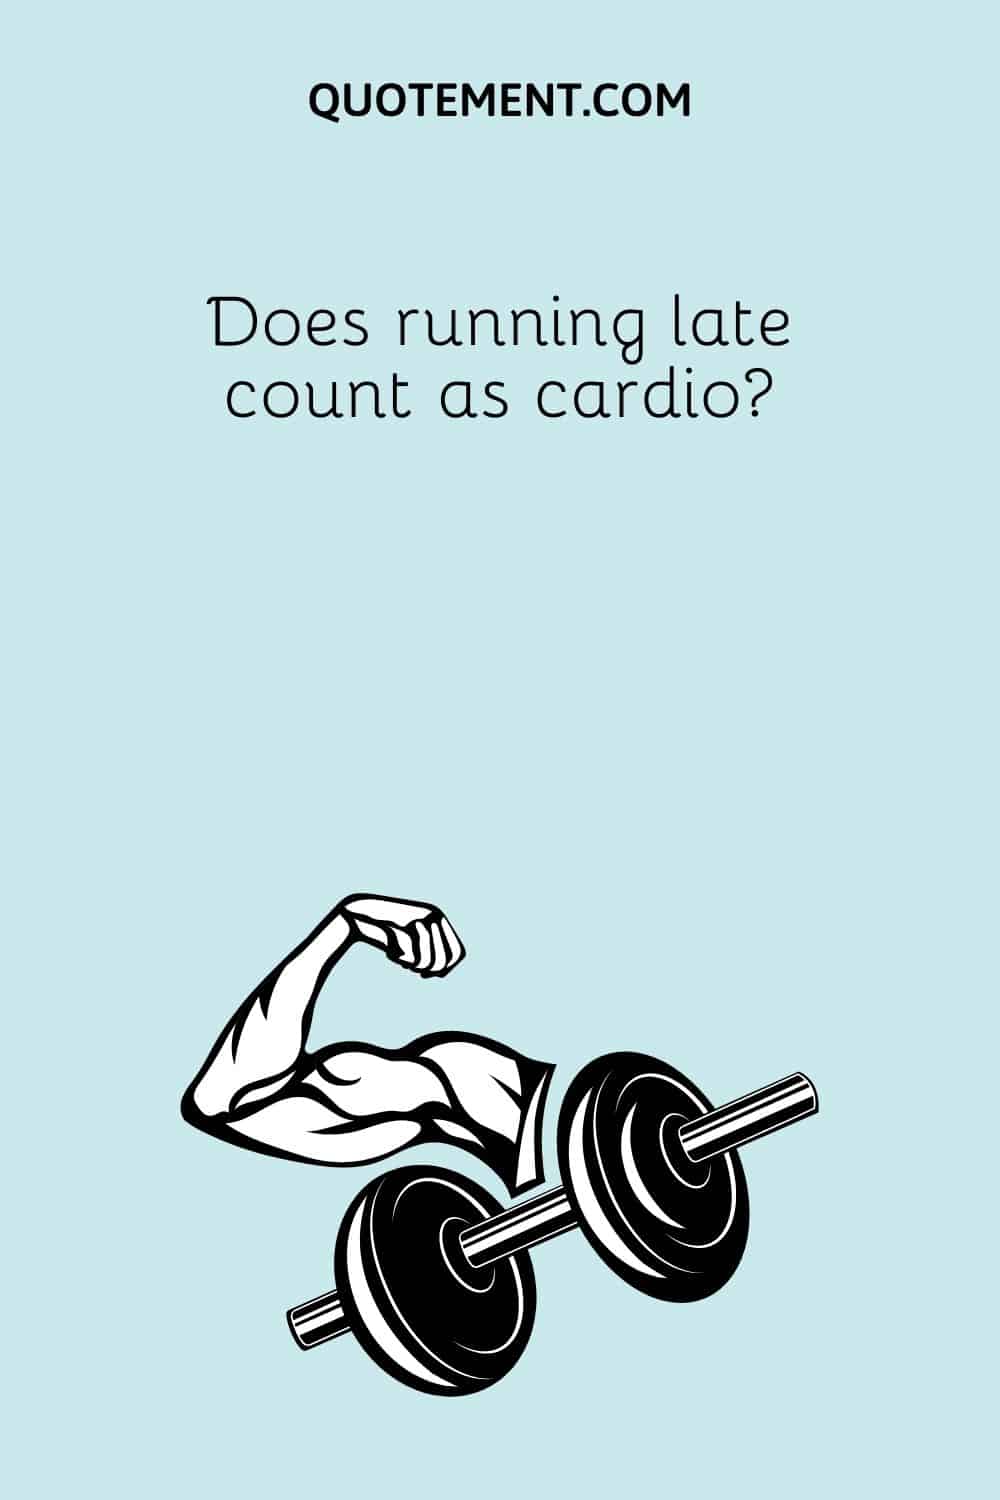 Does running late count as cardio